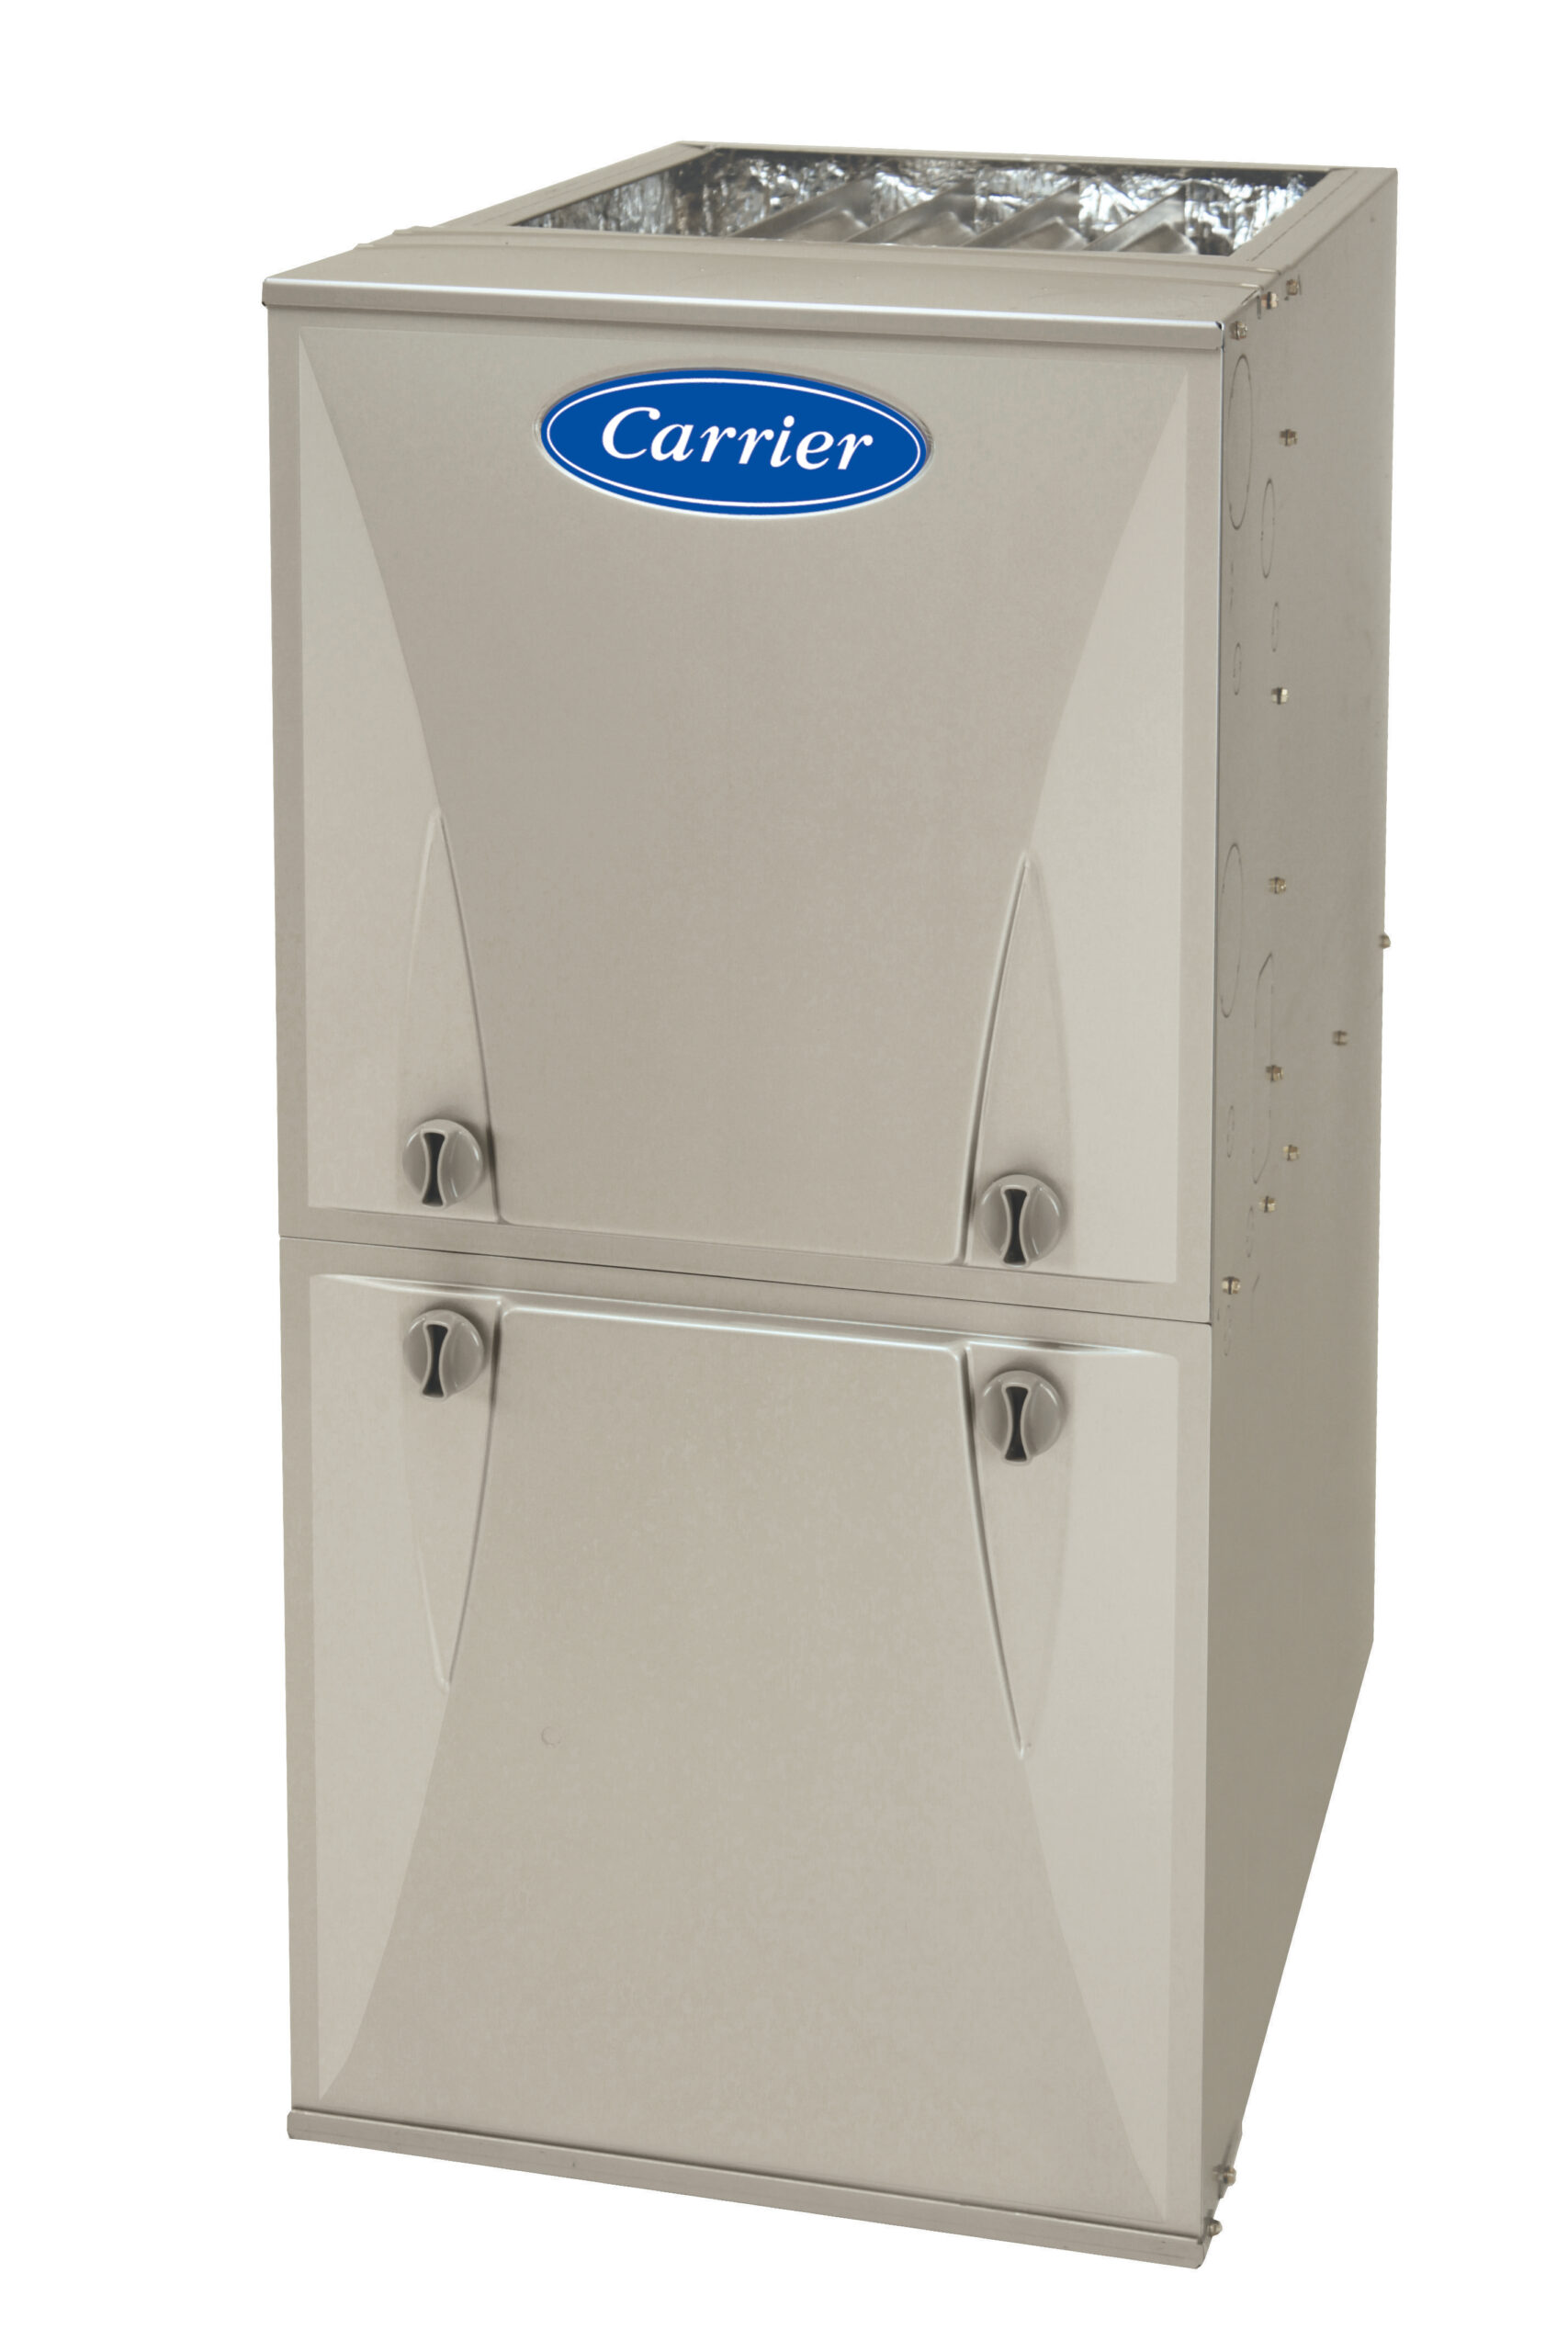 new furnace from Carrier